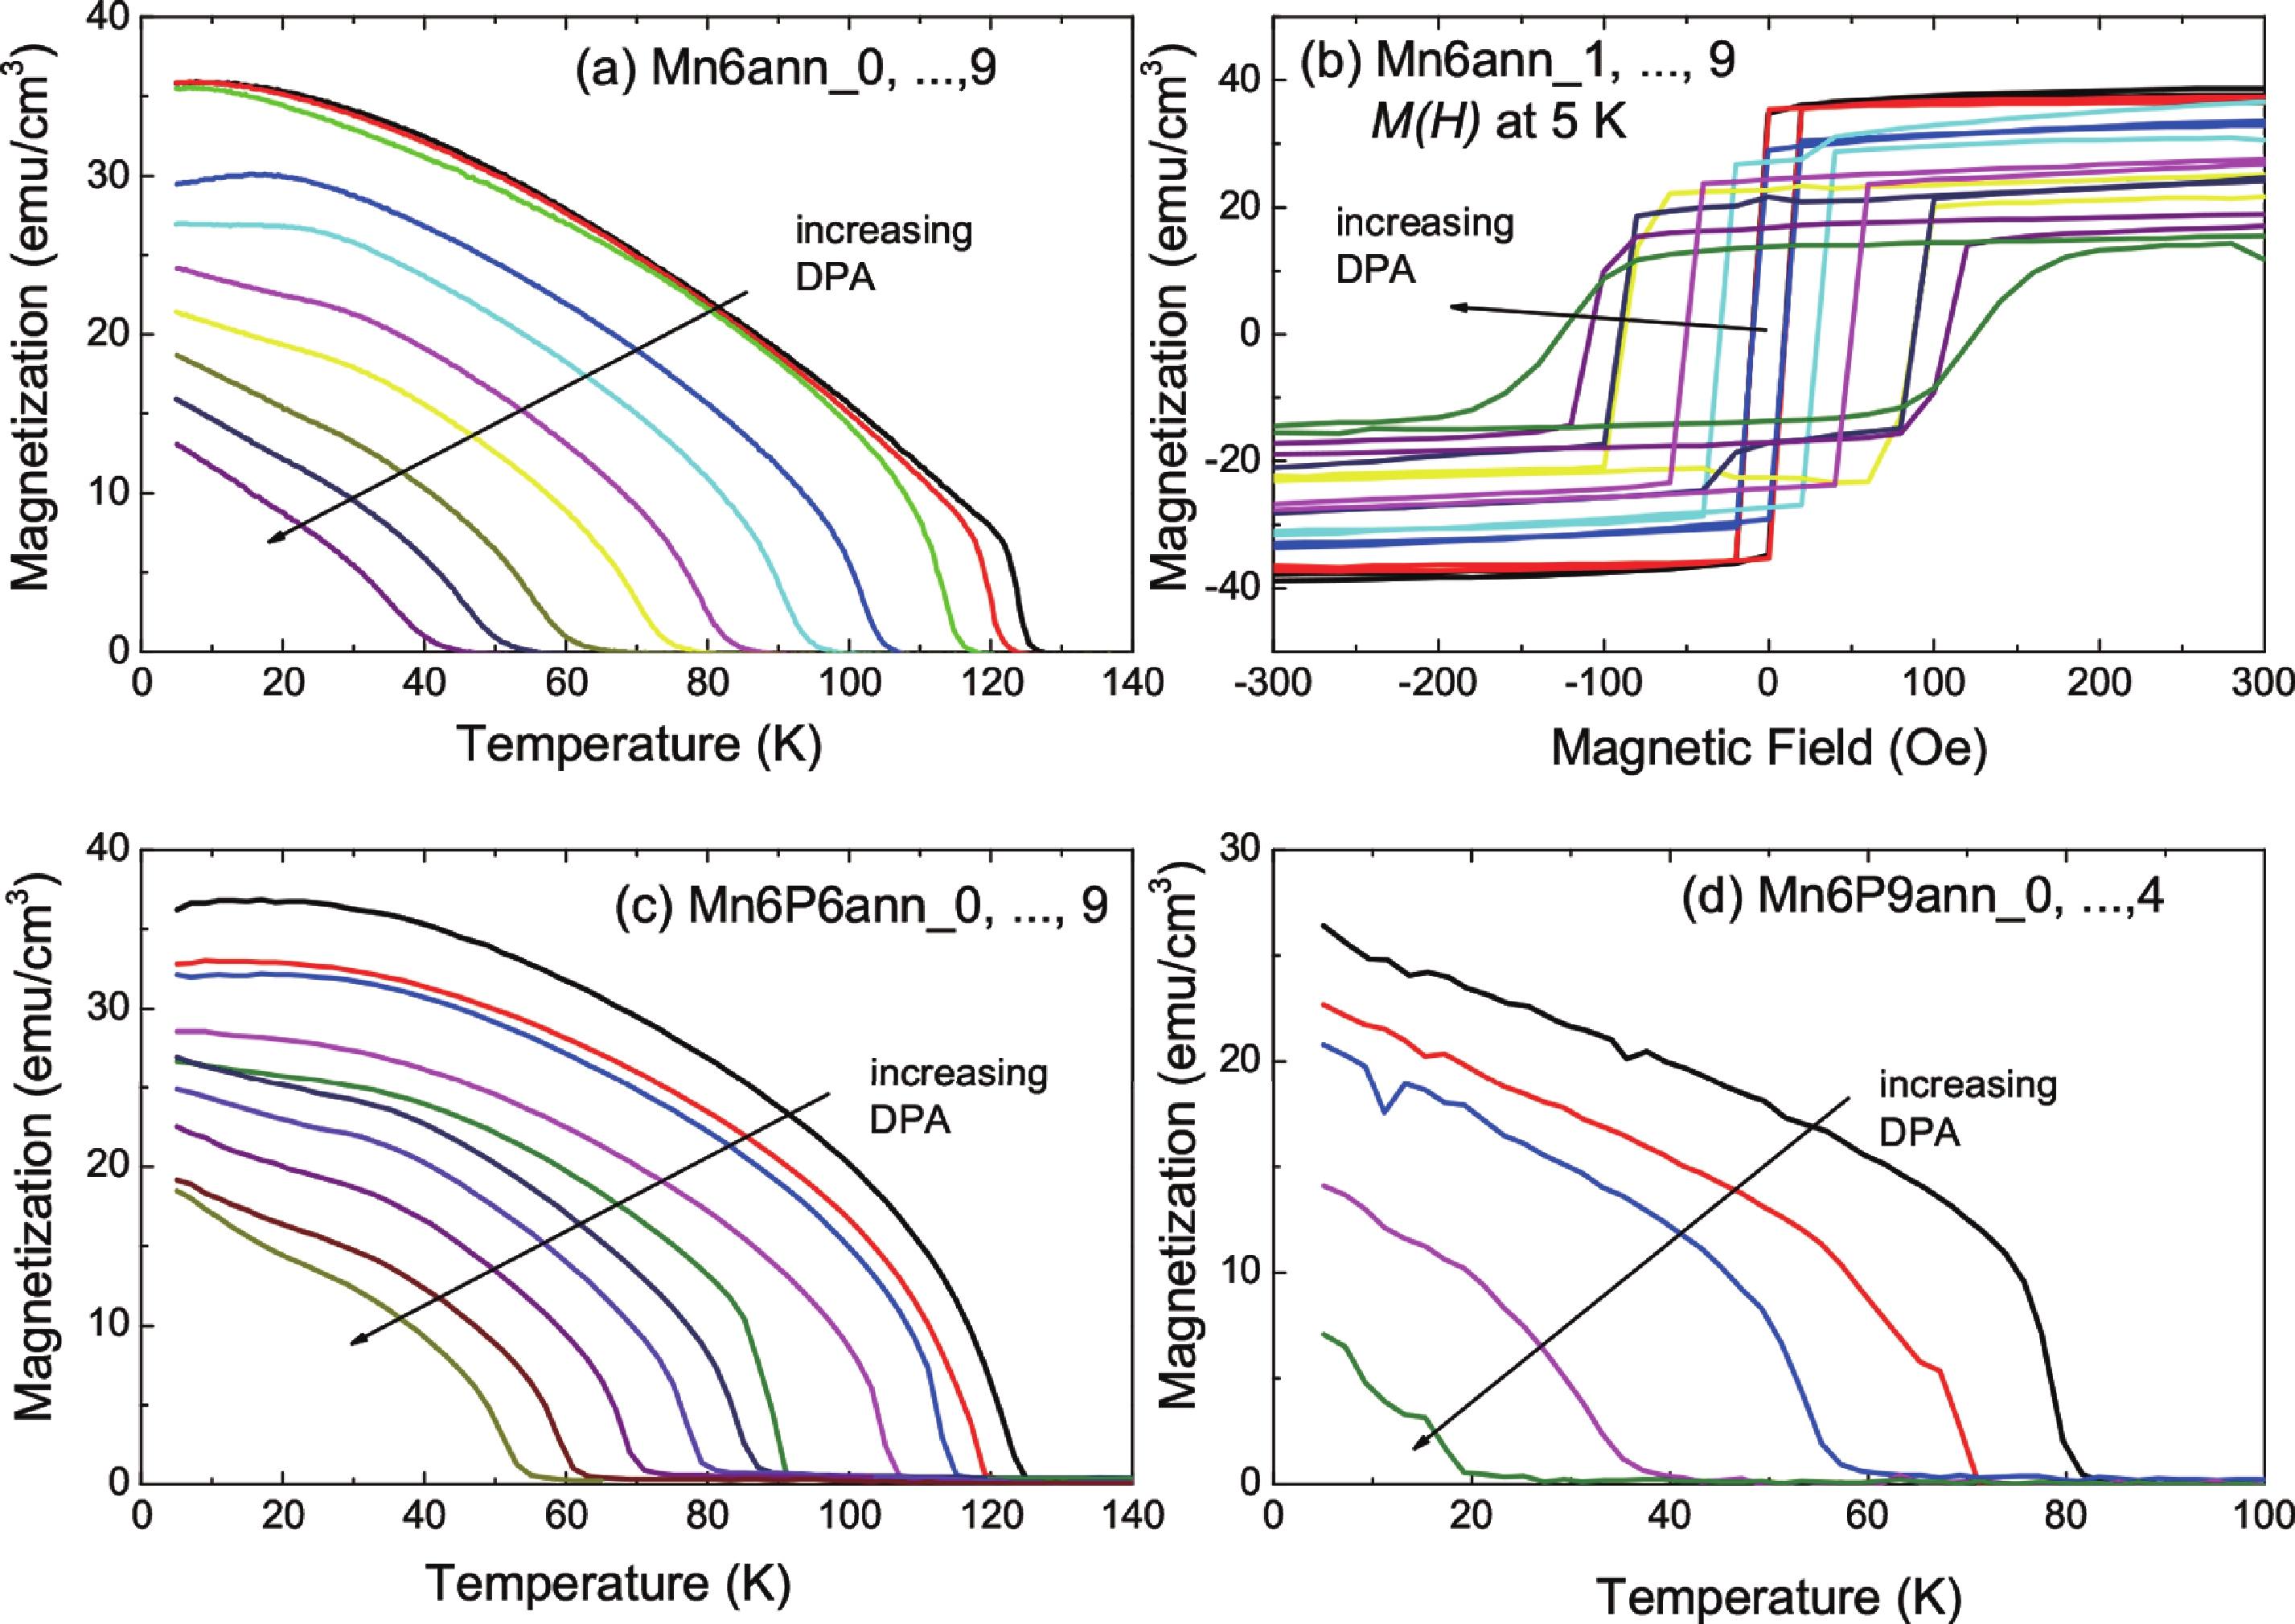 (Color online) Magnetic properties after introducing hole compensation by ion irradiation. The ion ﬂuence was increased in linear steps. (a), (c), and (d) show the temperature dependent magnetization for different samples, while (b) shows the magnetic hysteresis for sample Mn6ann (GaMnAs) for various ion ﬂuences. The temperature-dependent magnetization is measured at a small ﬁeld of 20 Oe after cooling in ﬁeld. One observes an increase in the coercive ﬁeld HC when TC and the remanent magnetization decrease. The arrows indicate the increase of DPA from 0 to 2.88 × 10−3. In each panel, the black line is the result for the nonirradiated sample. This figure is drawn from Ref. [16].